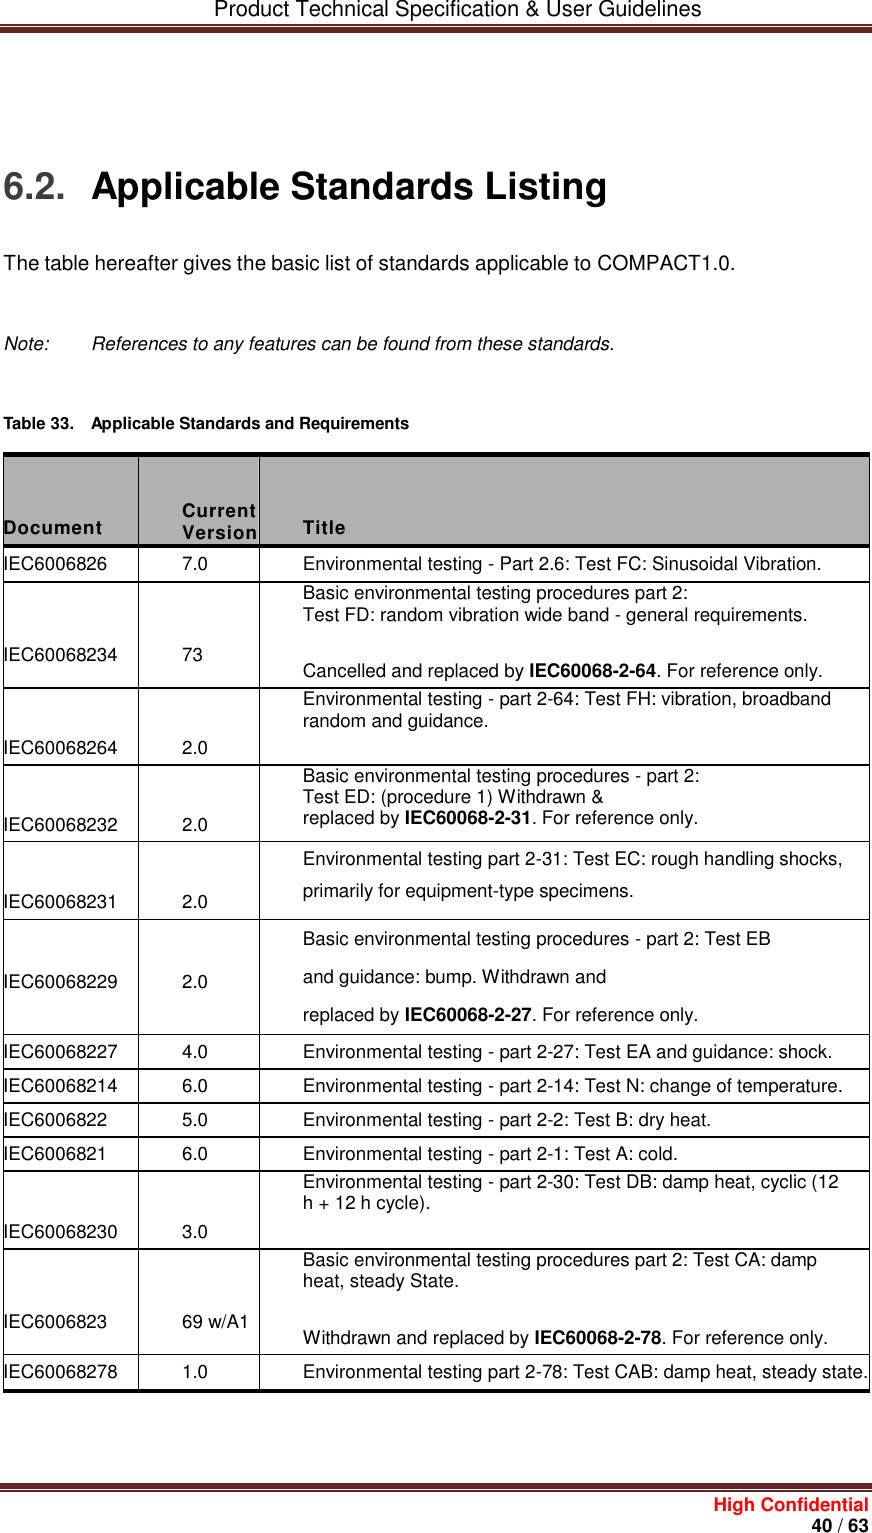         Product Technical Specification &amp; User Guidelines     High Confidential       40 / 63         6.2.  Applicable Standards Listing The table hereafter gives the basic list of standards applicable to COMPACT1.0.    Note:  References to any features can be found from these standards.   Table 33.  Applicable Standards and Requirements    Document  Current Version  Title IEC6006826 7.0 Environmental testing - Part 2.6: Test FC: Sinusoidal Vibration.  IEC60068234  73 Basic environmental testing procedures part 2: Test FD: random vibration wide band - general requirements. Cancelled and replaced by IEC60068-2-64. For reference only.  IEC60068264  2.0 Environmental testing - part 2-64: Test FH: vibration, broadband random and guidance.  IEC60068232  2.0 Basic environmental testing procedures - part 2: Test ED: (procedure 1) Withdrawn &amp; replaced by IEC60068-2-31. For reference only.  IEC60068231  2.0 Environmental testing part 2-31: Test EC: rough handling shocks, primarily for equipment-type specimens.  IEC60068229  2.0 Basic environmental testing procedures - part 2: Test EB and guidance: bump. Withdrawn and replaced by IEC60068-2-27. For reference only. IEC60068227 4.0 Environmental testing - part 2-27: Test EA and guidance: shock. IEC60068214 6.0 Environmental testing - part 2-14: Test N: change of temperature. IEC6006822 5.0 Environmental testing - part 2-2: Test B: dry heat. IEC6006821 6.0 Environmental testing - part 2-1: Test A: cold.  IEC60068230  3.0 Environmental testing - part 2-30: Test DB: damp heat, cyclic (12 h + 12 h cycle).  IEC6006823  69 w/A1 Basic environmental testing procedures part 2: Test CA: damp heat, steady State. Withdrawn and replaced by IEC60068-2-78. For reference only. IEC60068278 1.0 Environmental testing part 2-78: Test CAB: damp heat, steady state.    